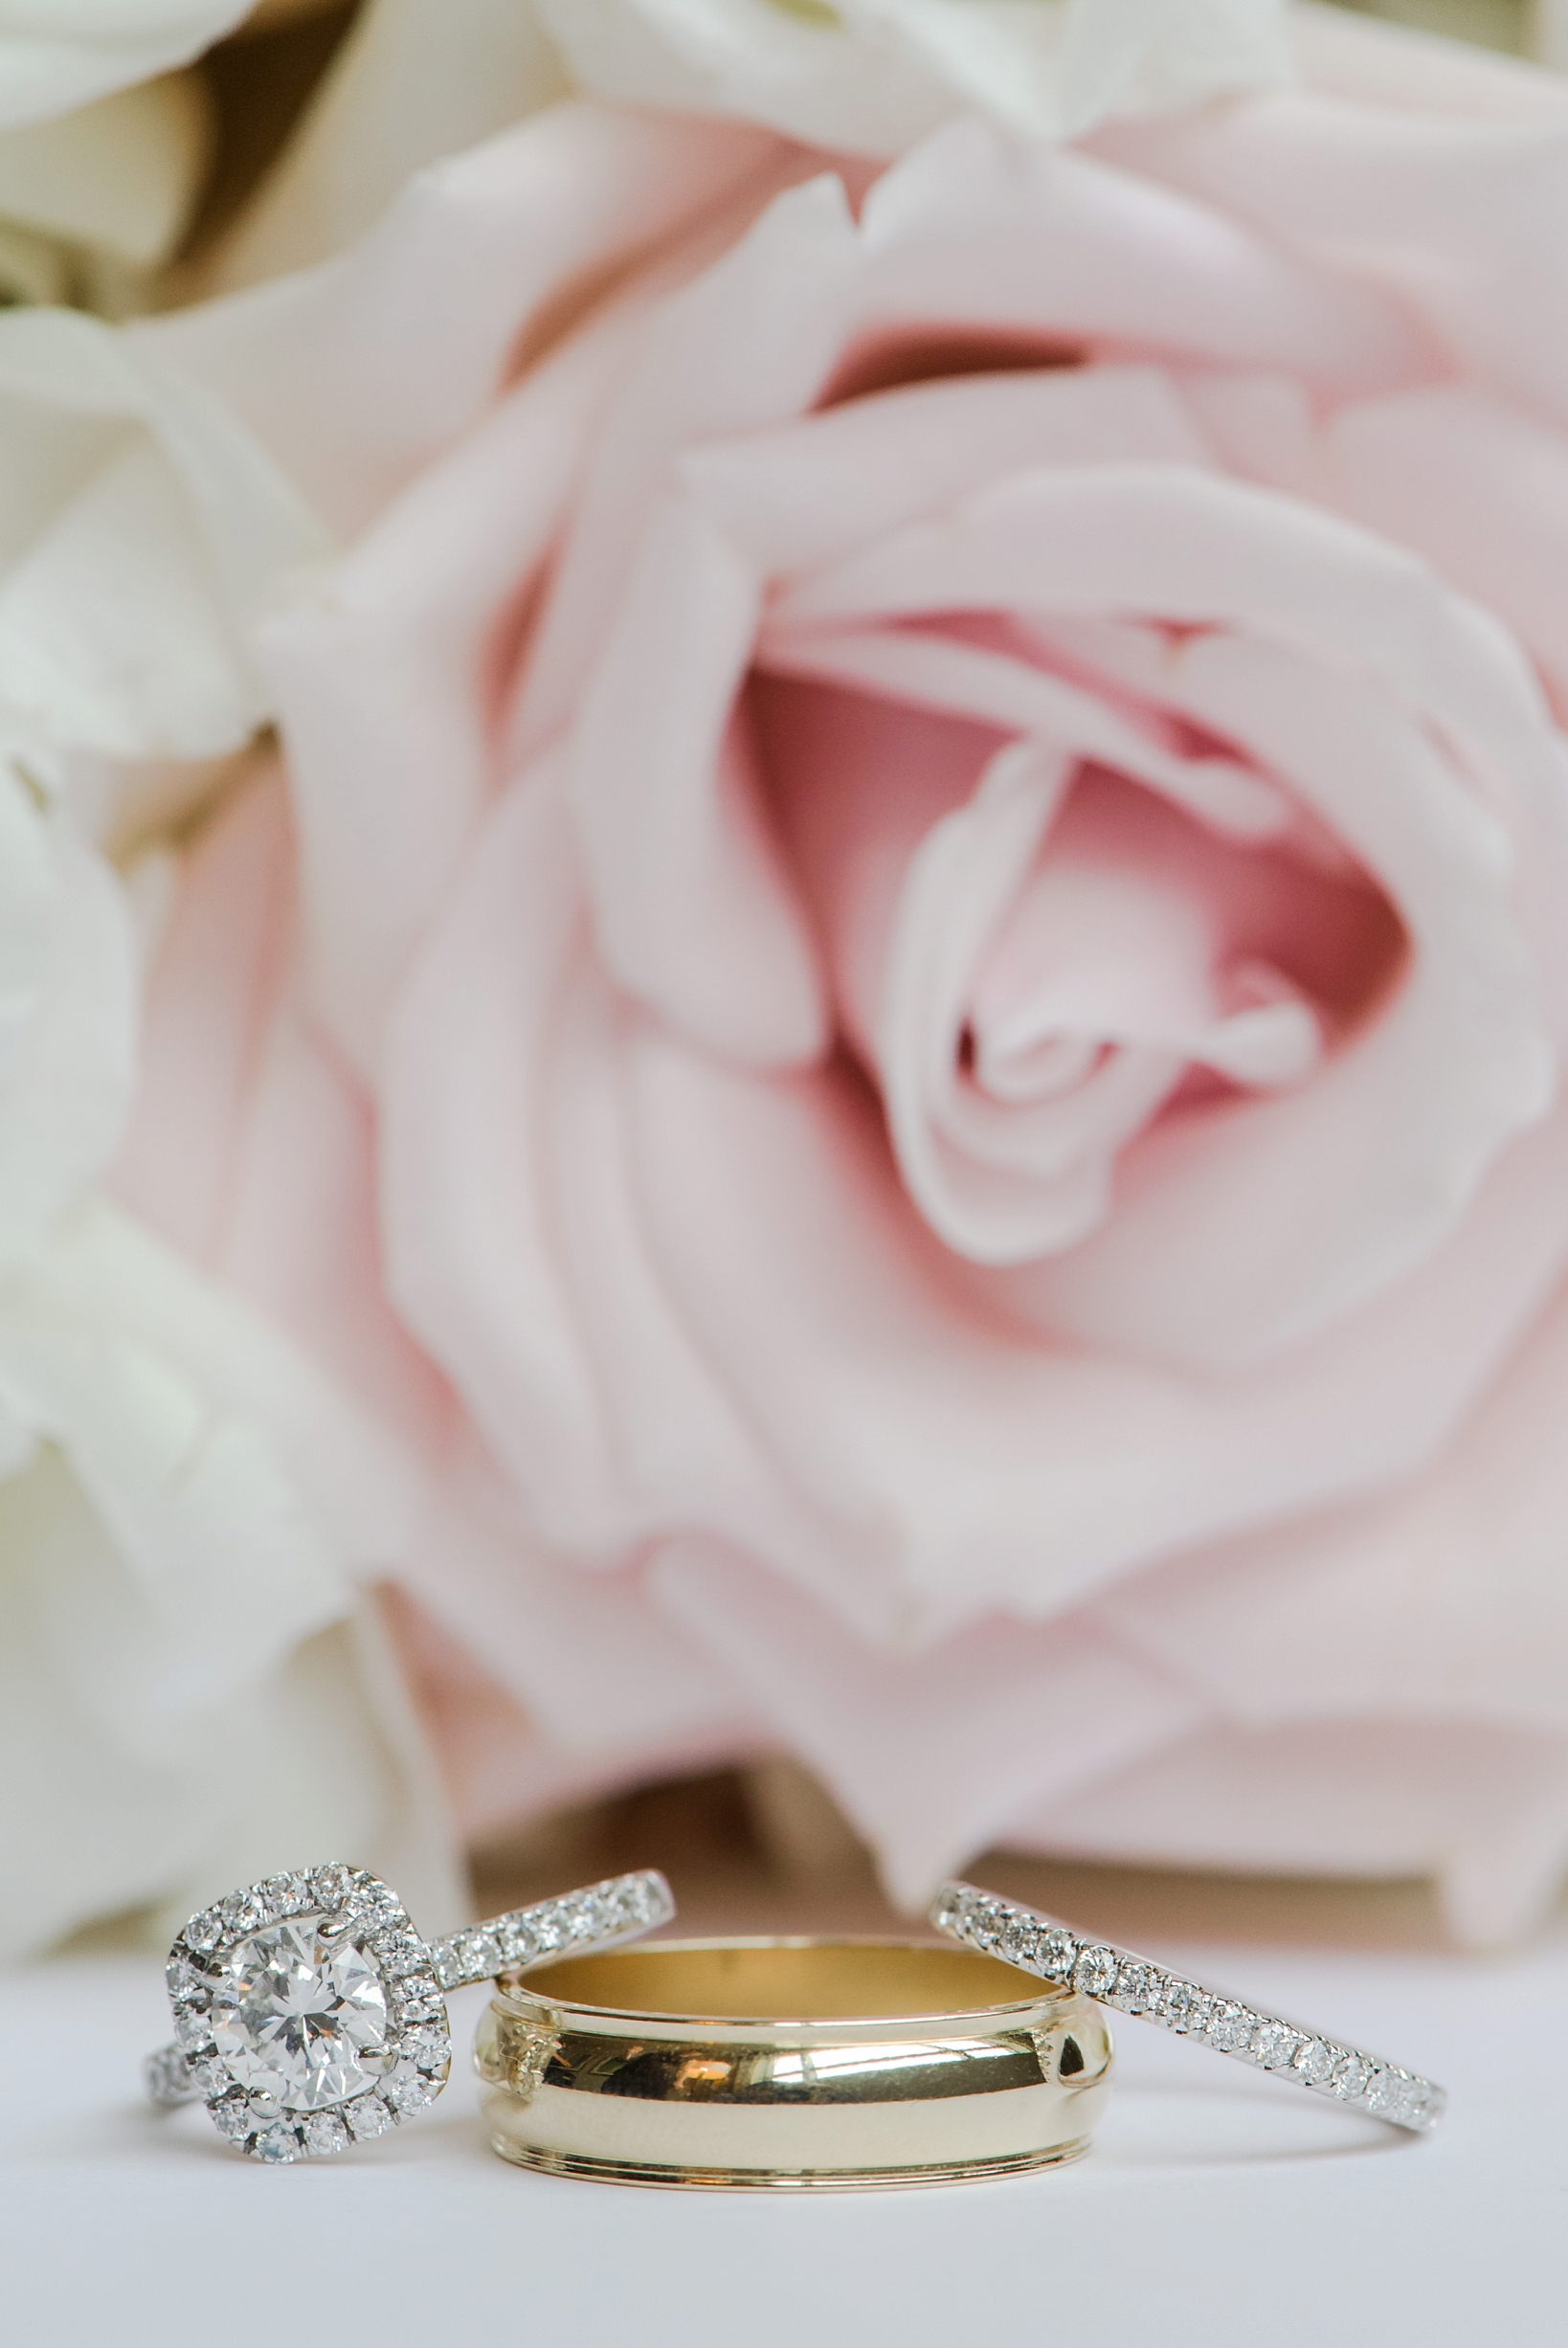 Wedding rings against the pink of a rose from the Bridal Bouquet